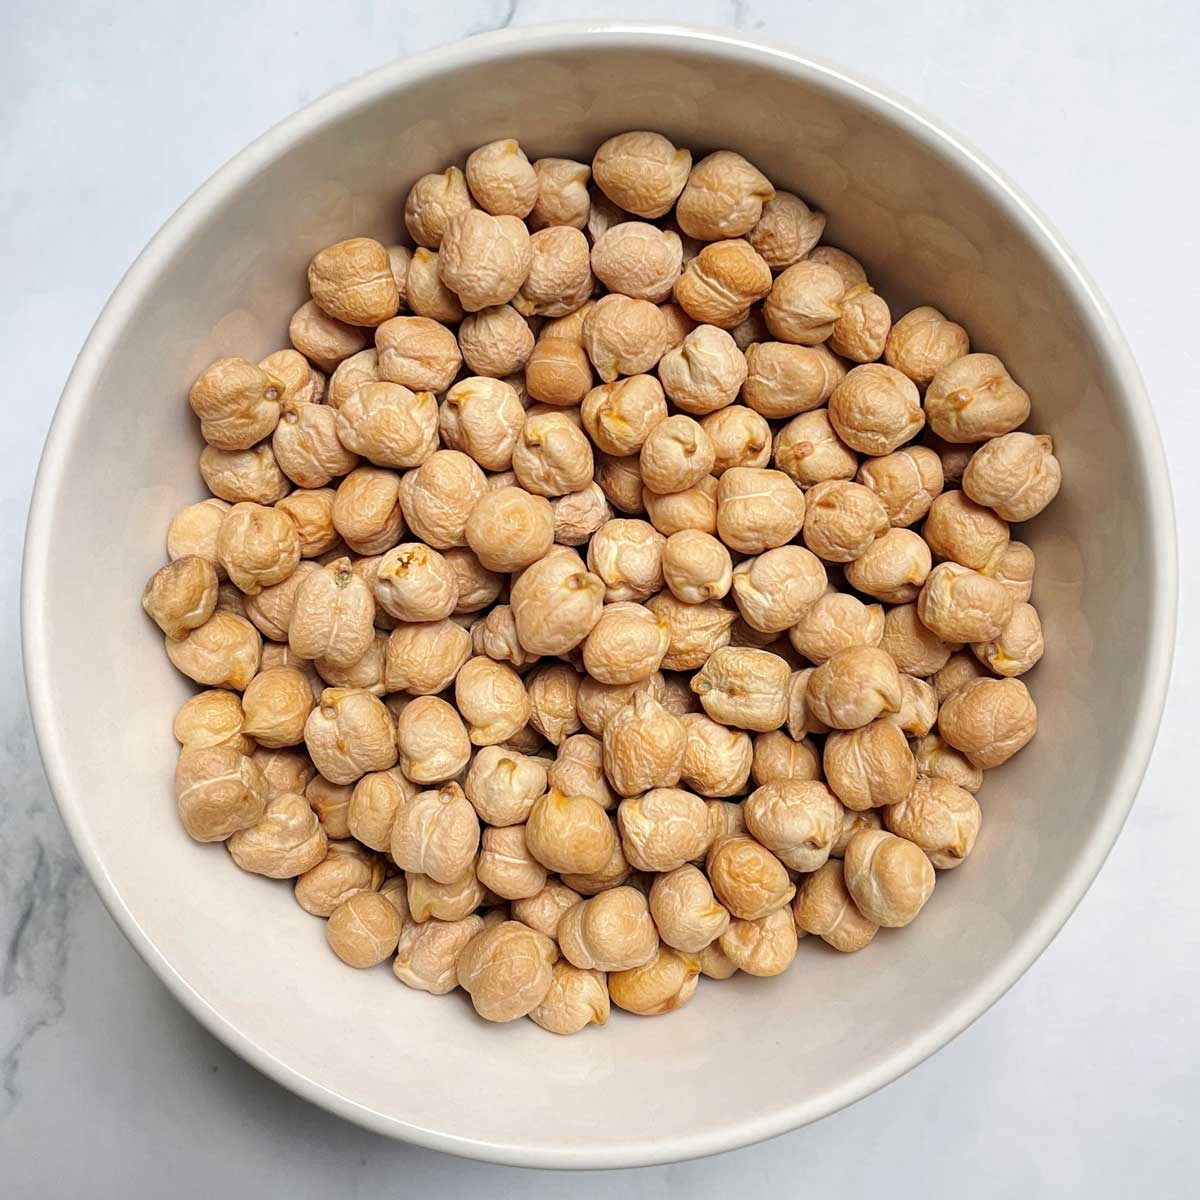 Unsoaked chickpeas in a bowl.